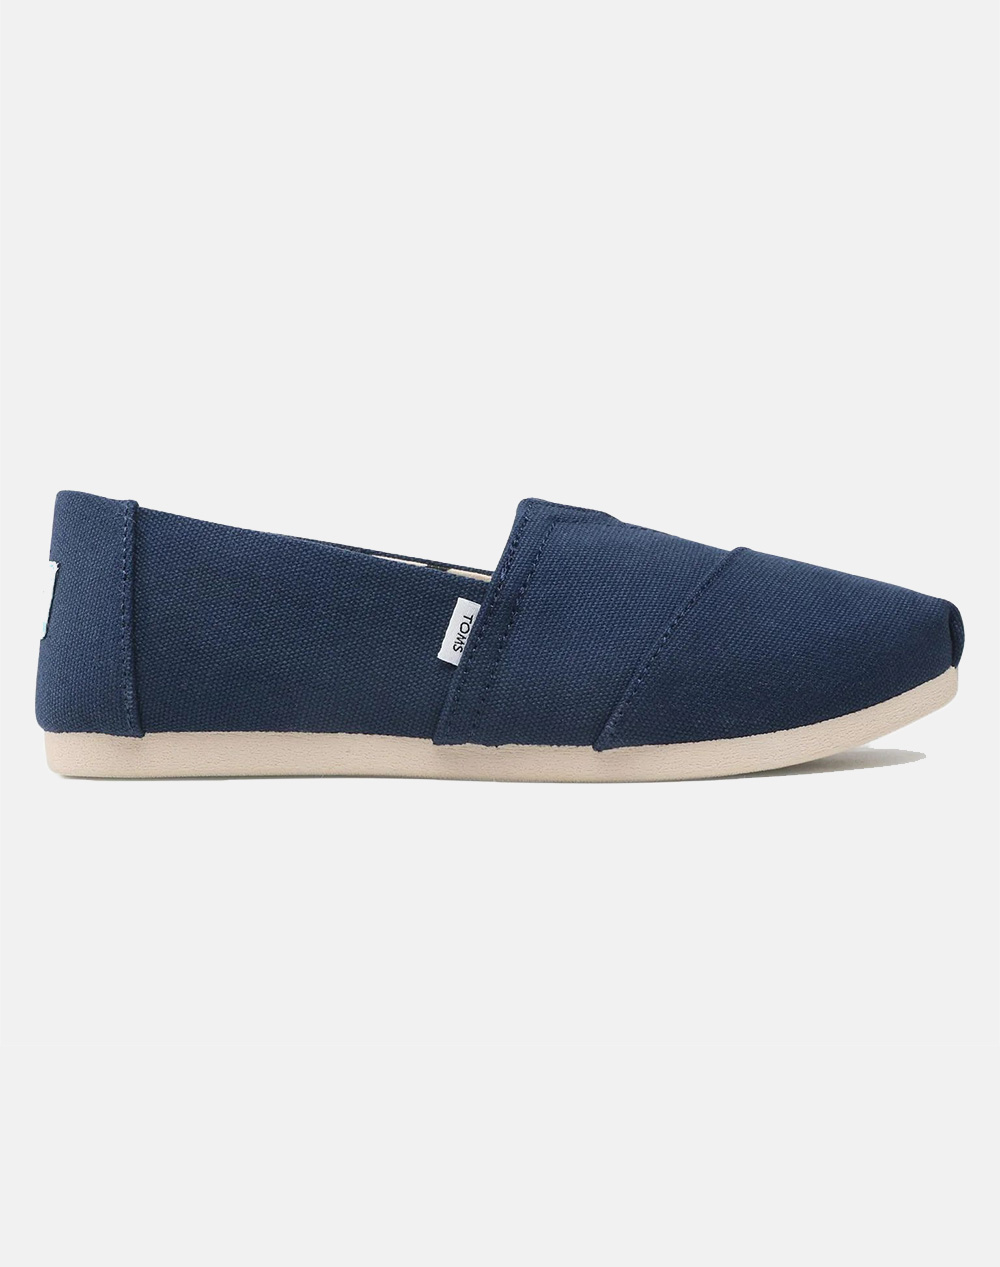 TOMS NVY RECYCLED COT CAN WM ALPR ESP 10017712-NVY NavyBlue 3810ATOMS6430035_XR22081